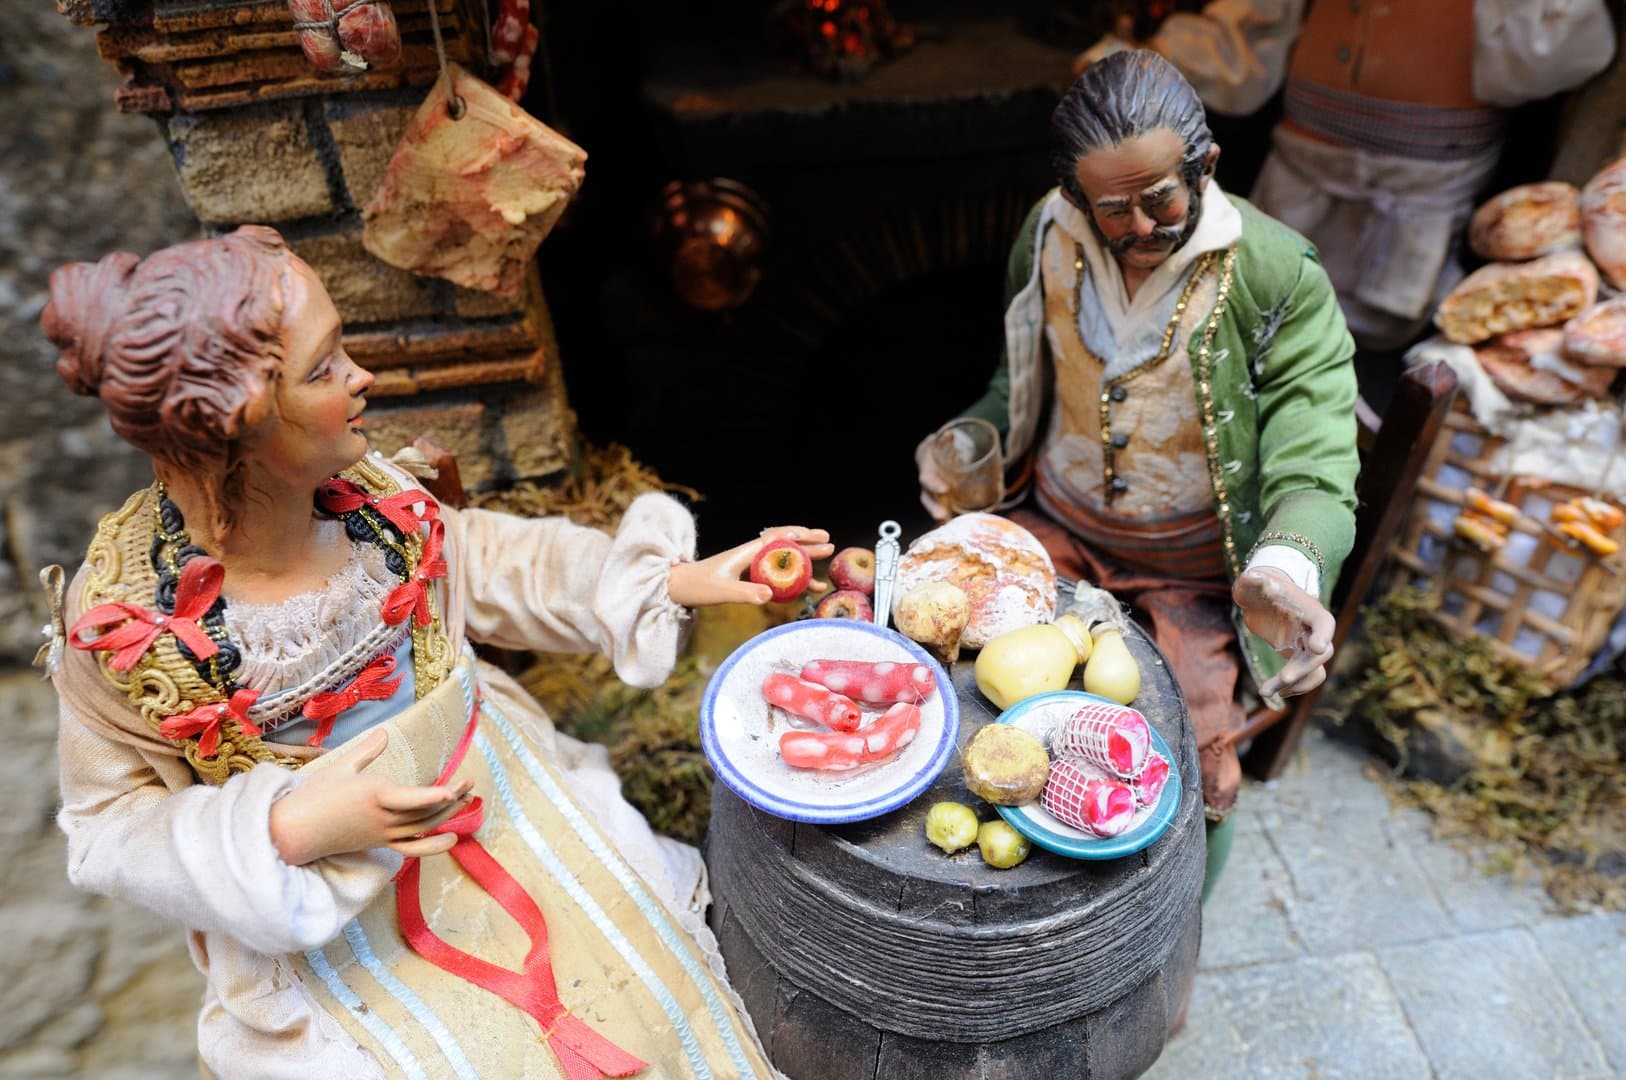 Free Folk Tales and Traditions Tour Naples3